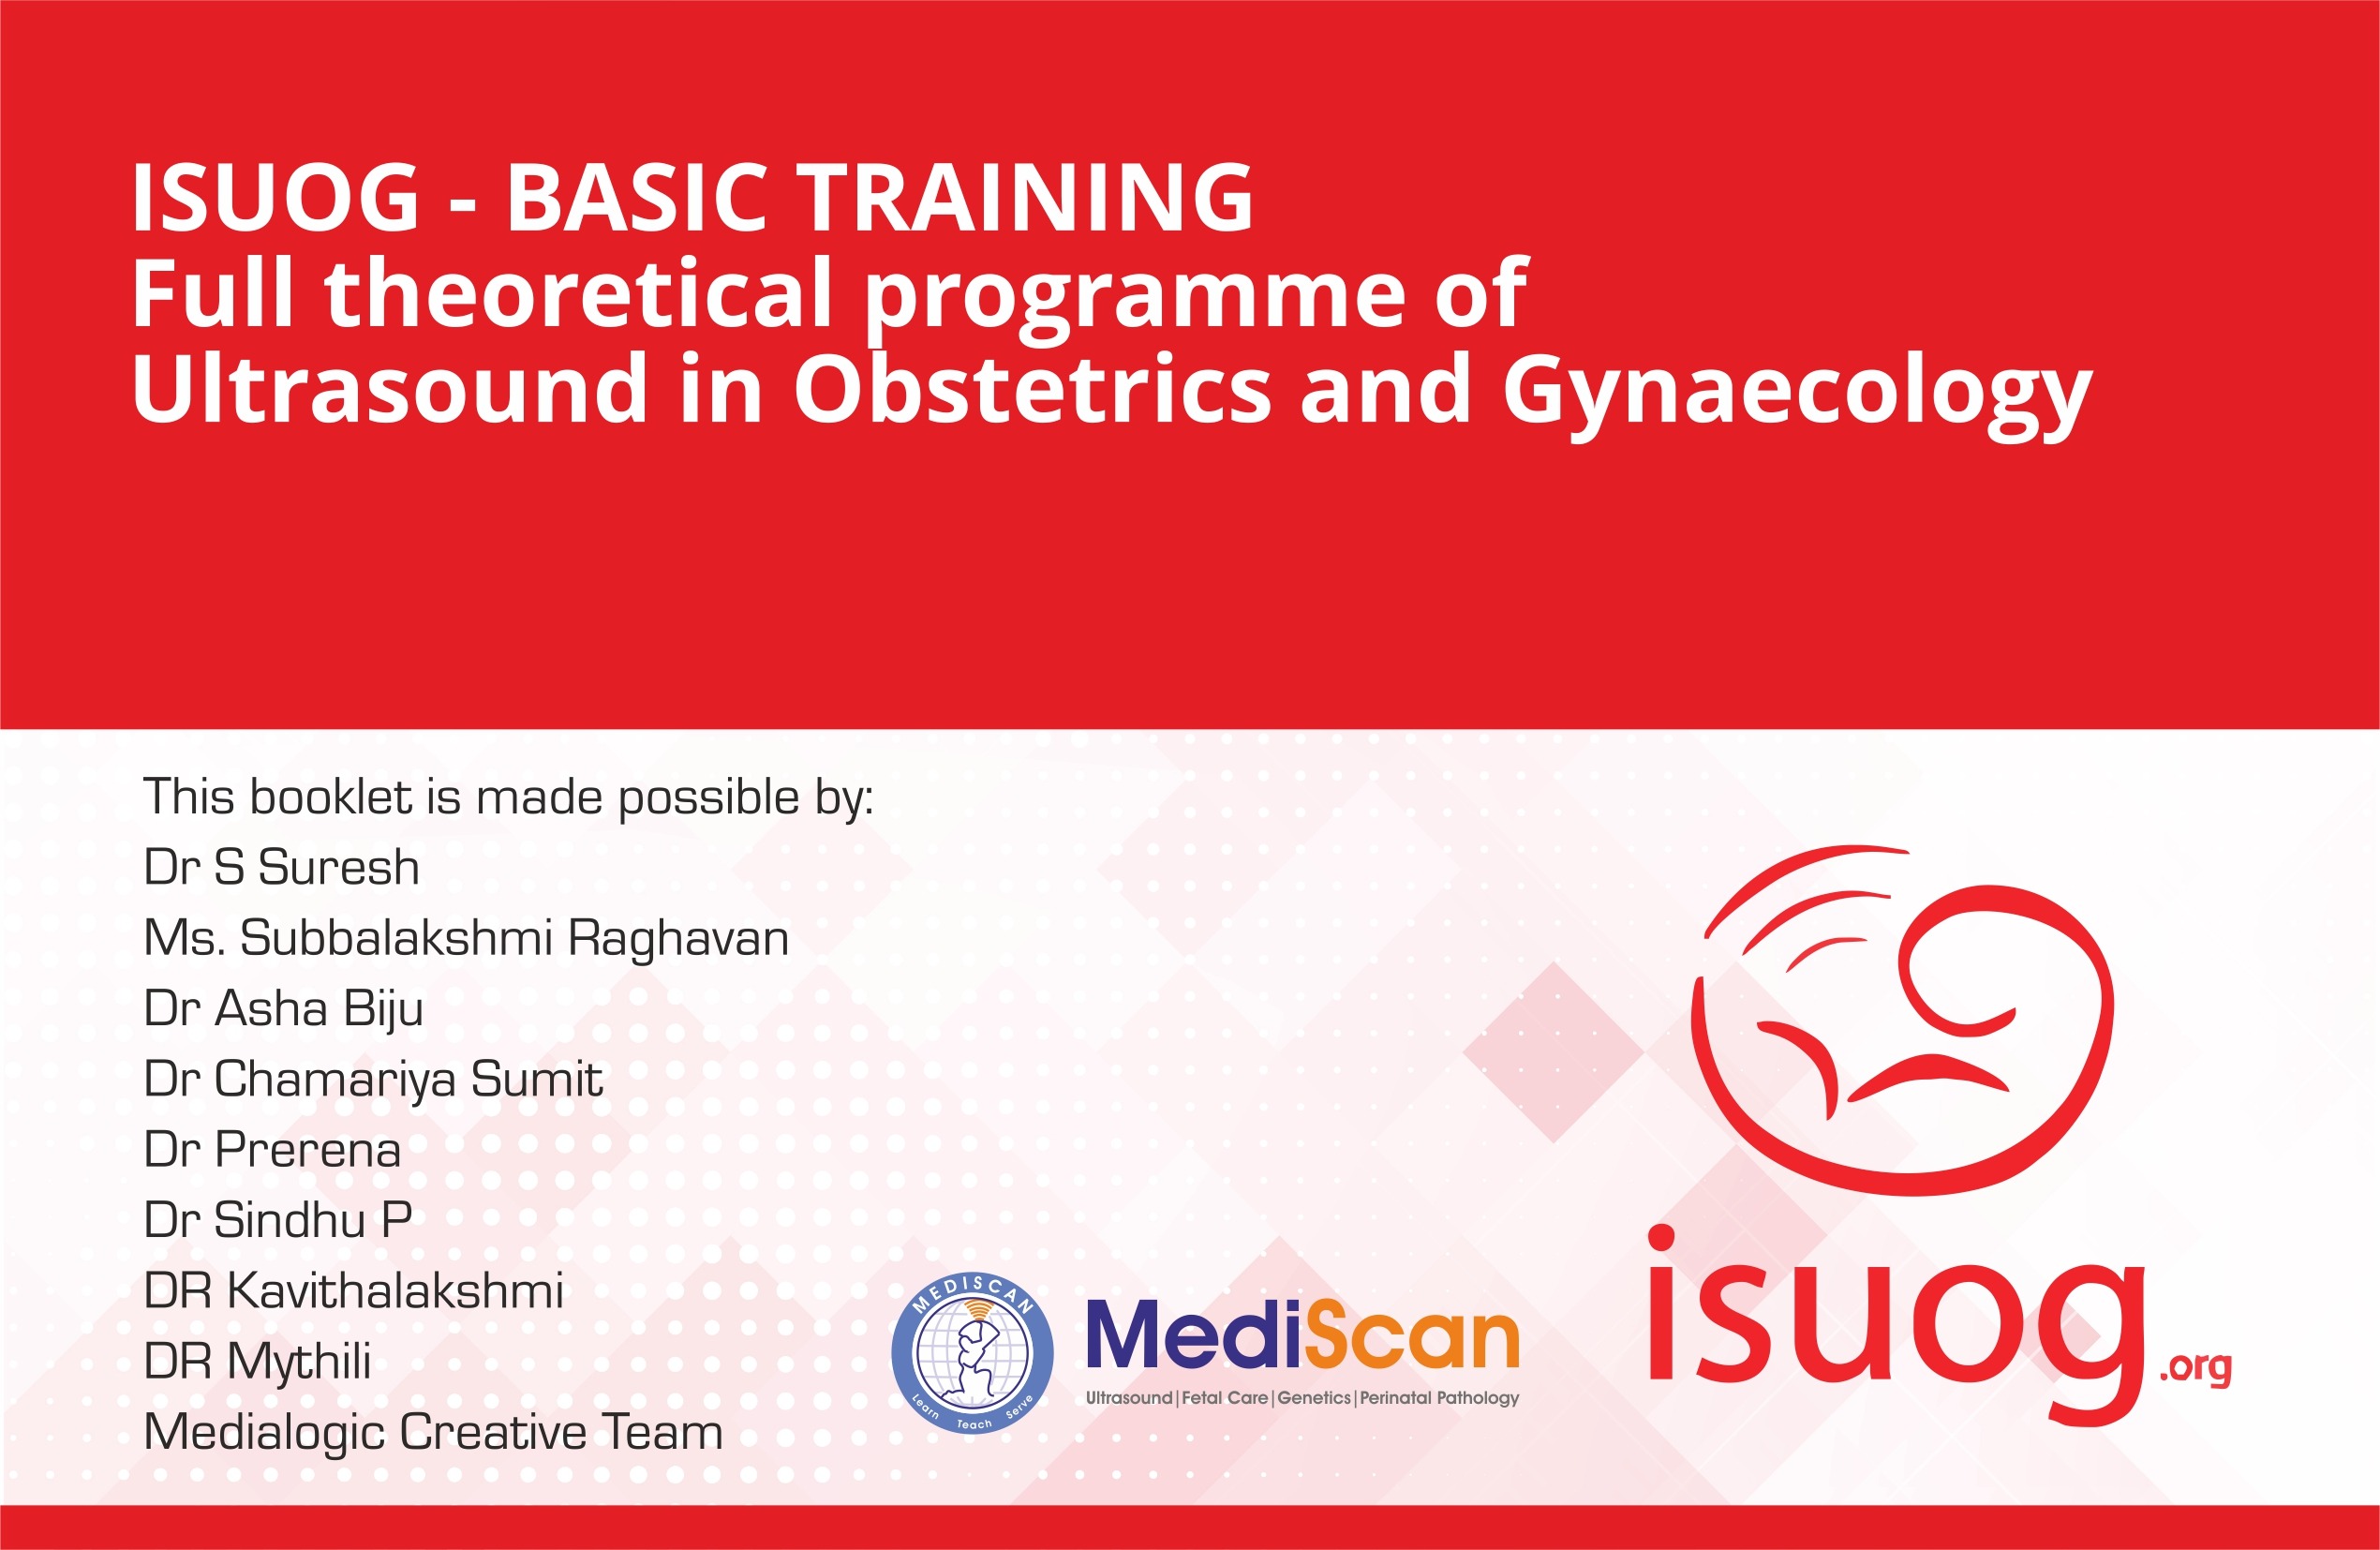 ISUOG - BASIC TRAINING Full theoretical programme of Ultrasound in Obstetrics and Gynaecology-2018